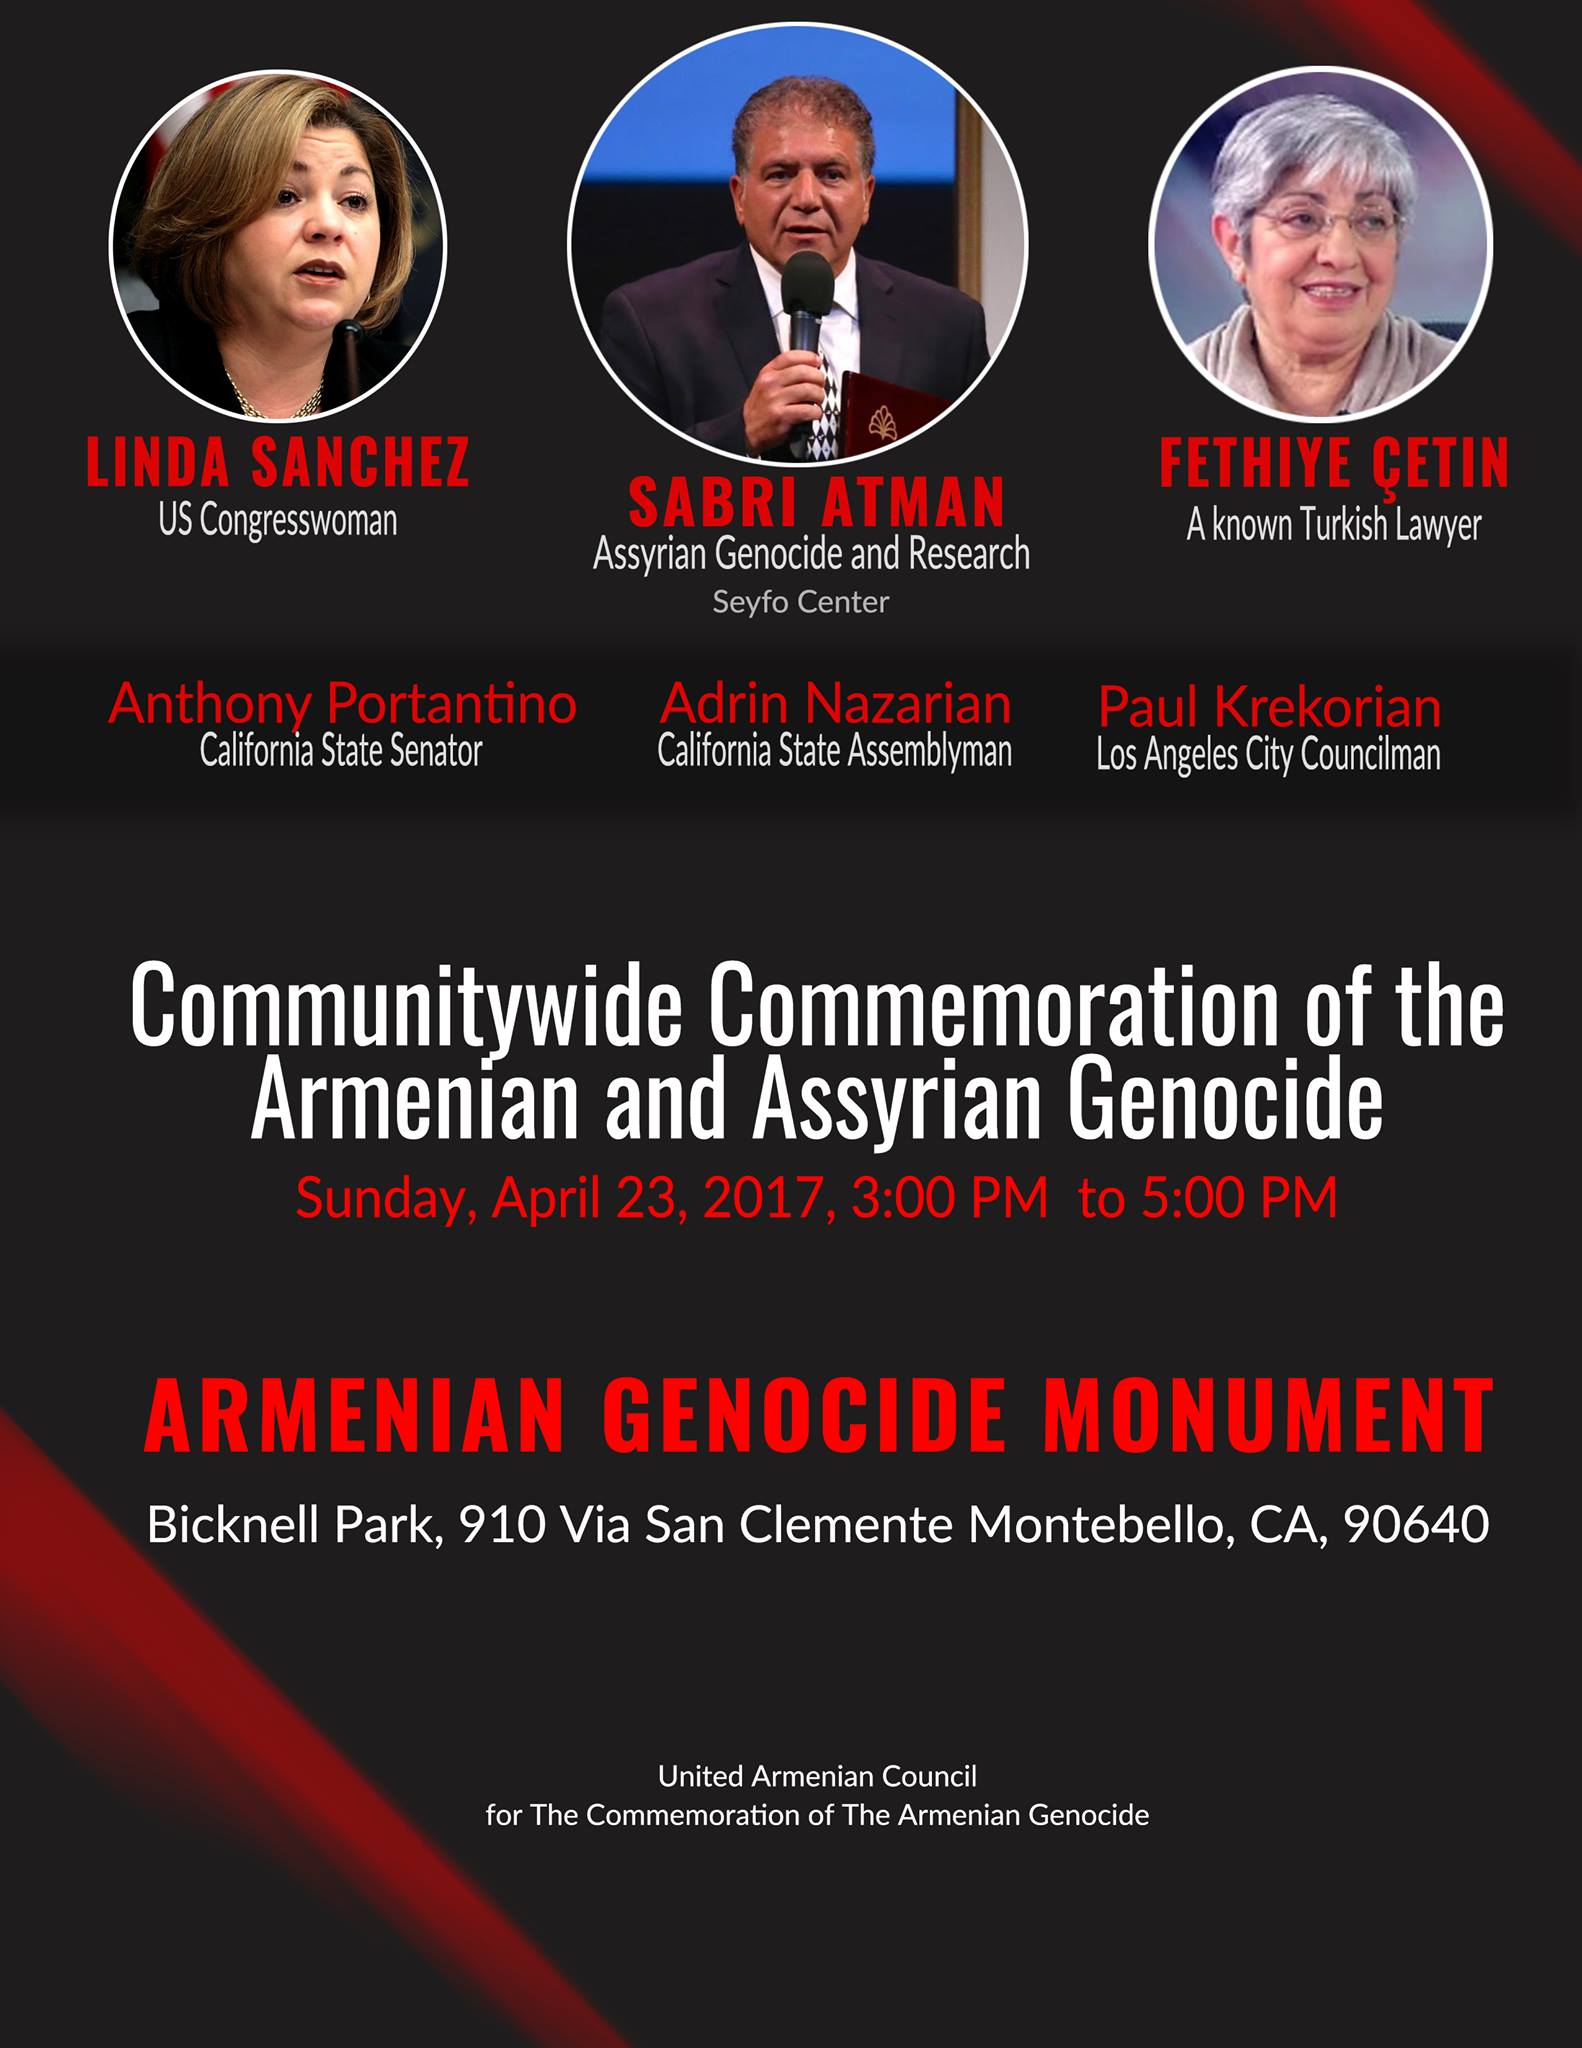 A Memo from Director Of Assyrian Genocide Research Center Mr. Sabri Atman